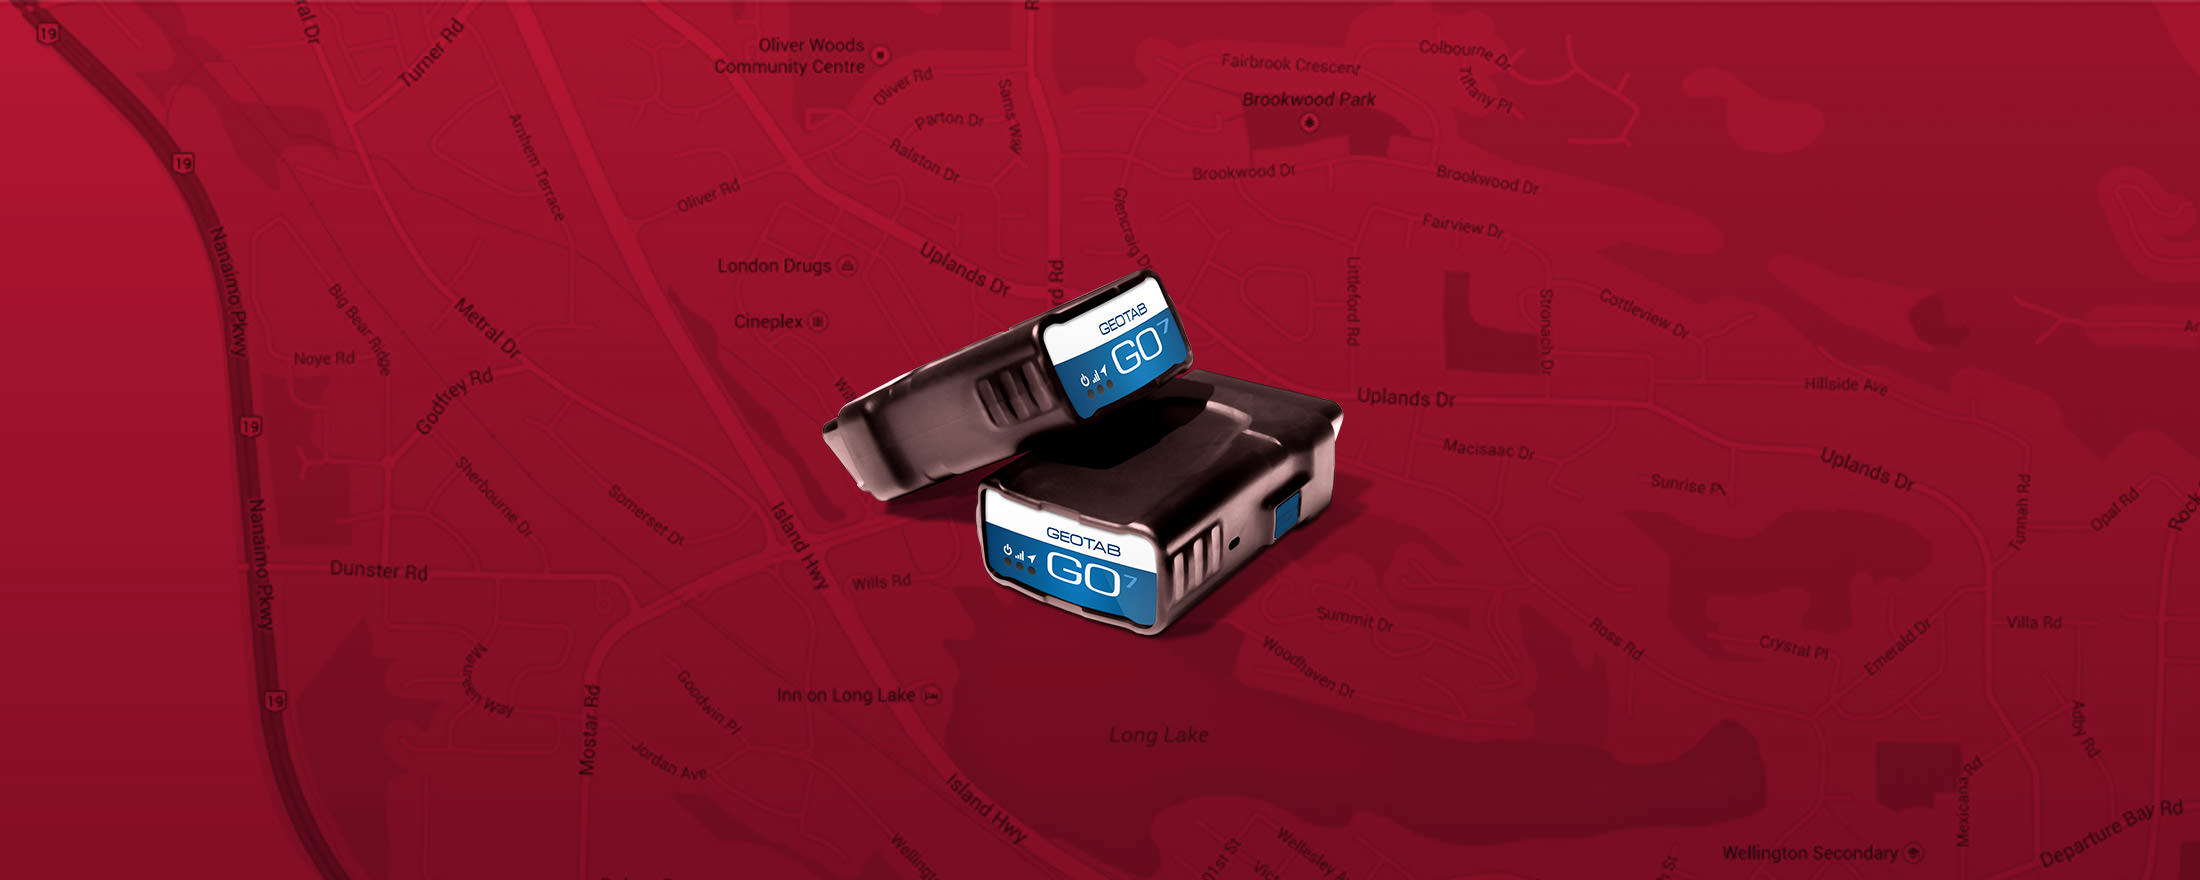 Two Geotab GO Devices on top of a red map